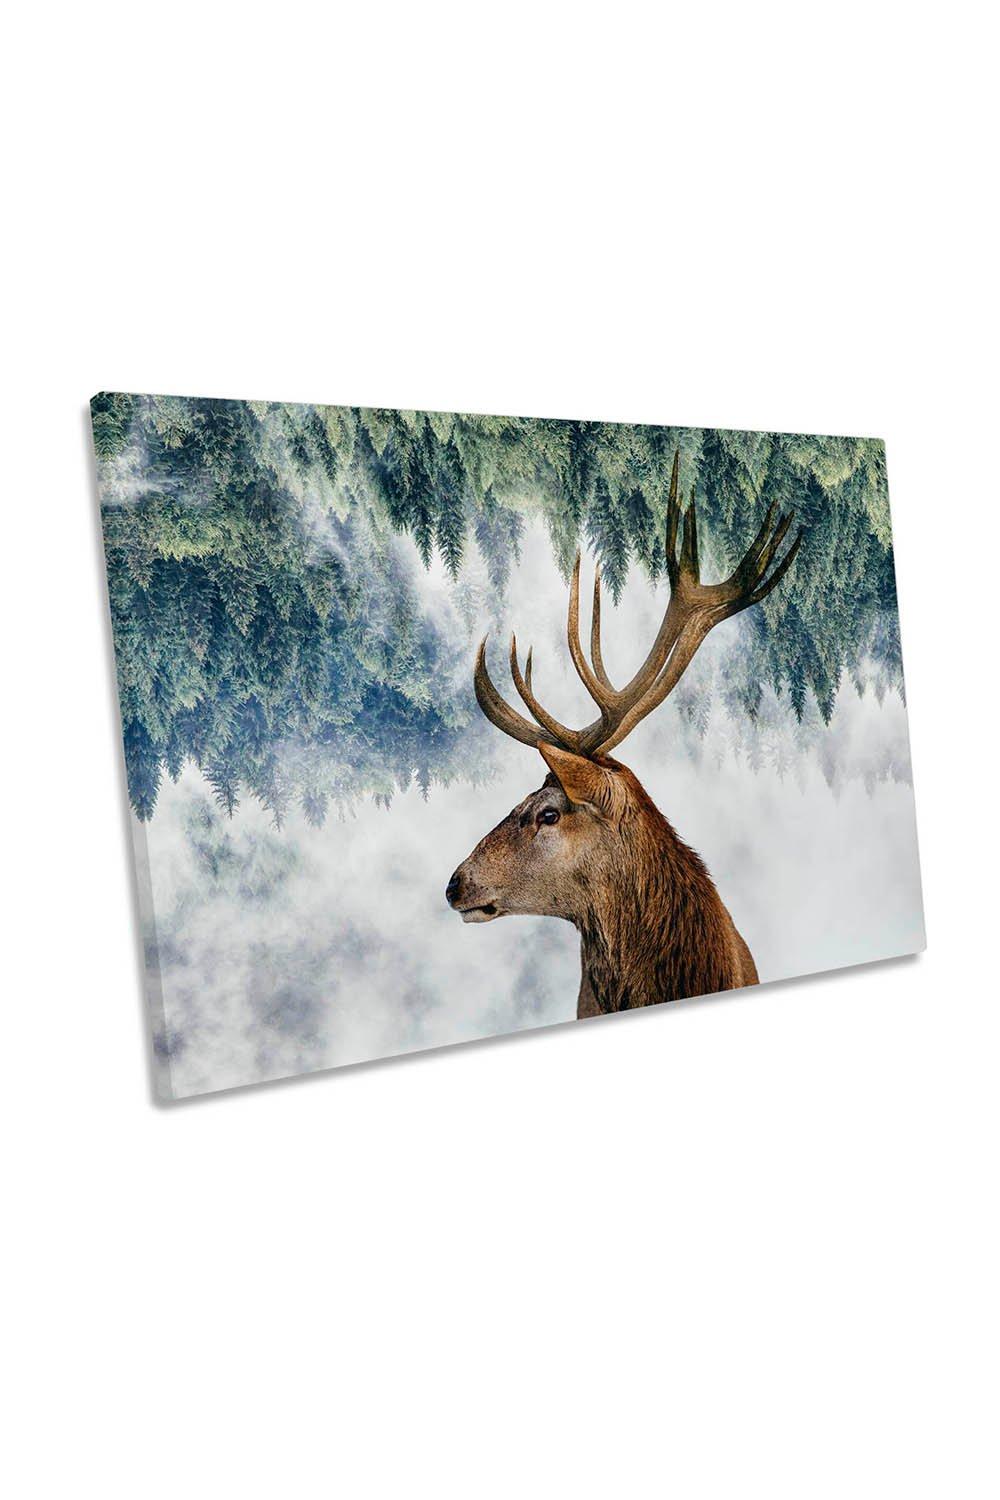 The Deer and the Woods Modern Canvas Wall Art Picture Print